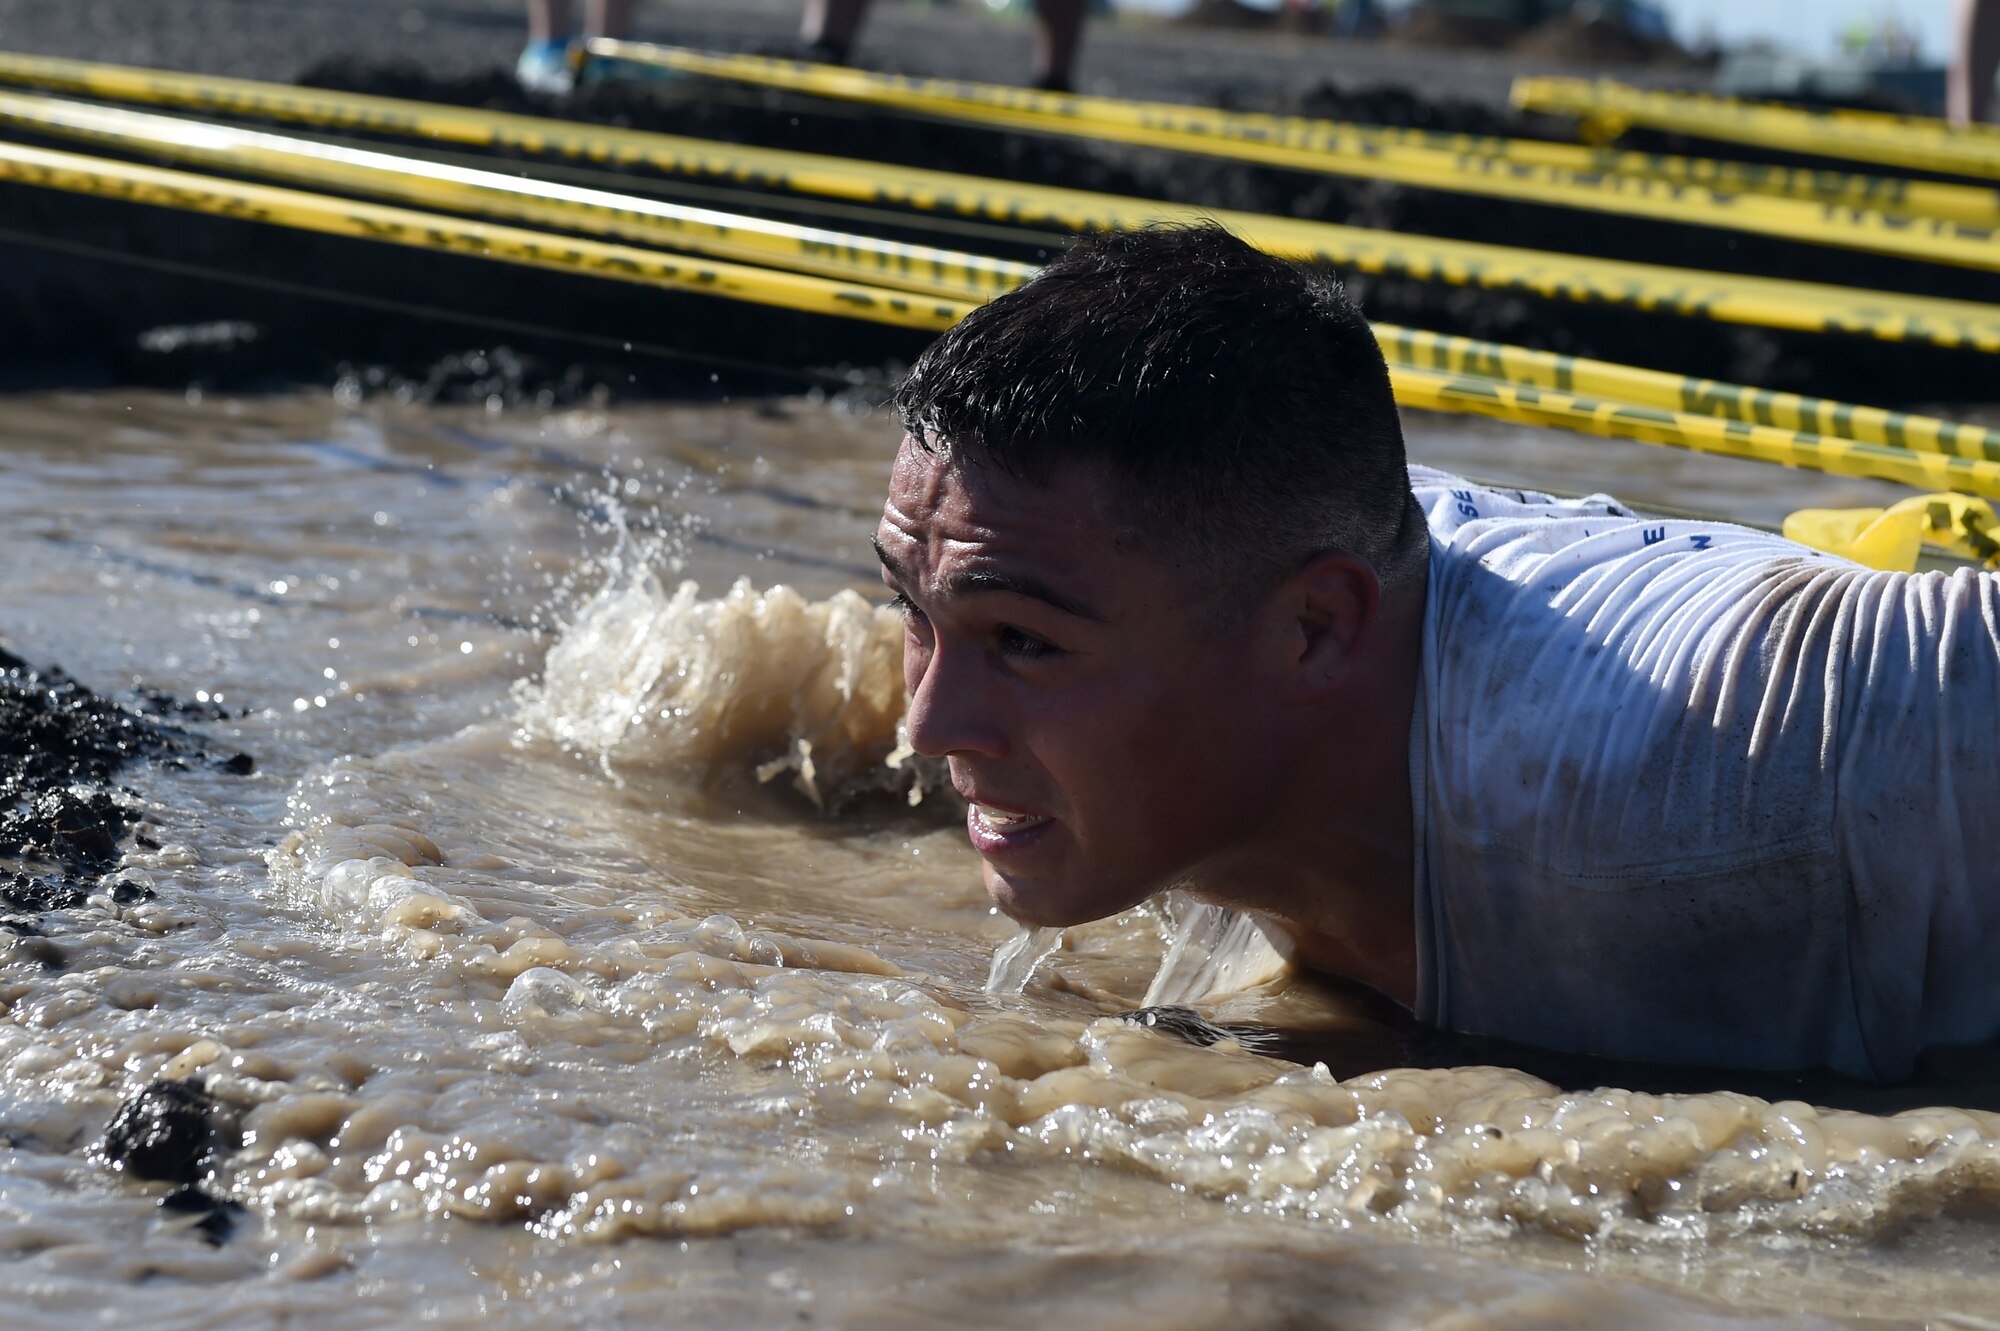 A Team Buckley member pushes through the low-crawl obstacle during WARFIT Sept. 25, 2014, on Buckley Air Force Base, Colo. The 460th Civil Engineer Squadron hosted the September WARFIT, which consisted of a 5K run and a mud obstacle course. WARFIT is a way for the 460th Space Wing and base partner units to get together and stay physically fit. (U.S. Air Force photo by Airman Emily E. Amyotte/Released)